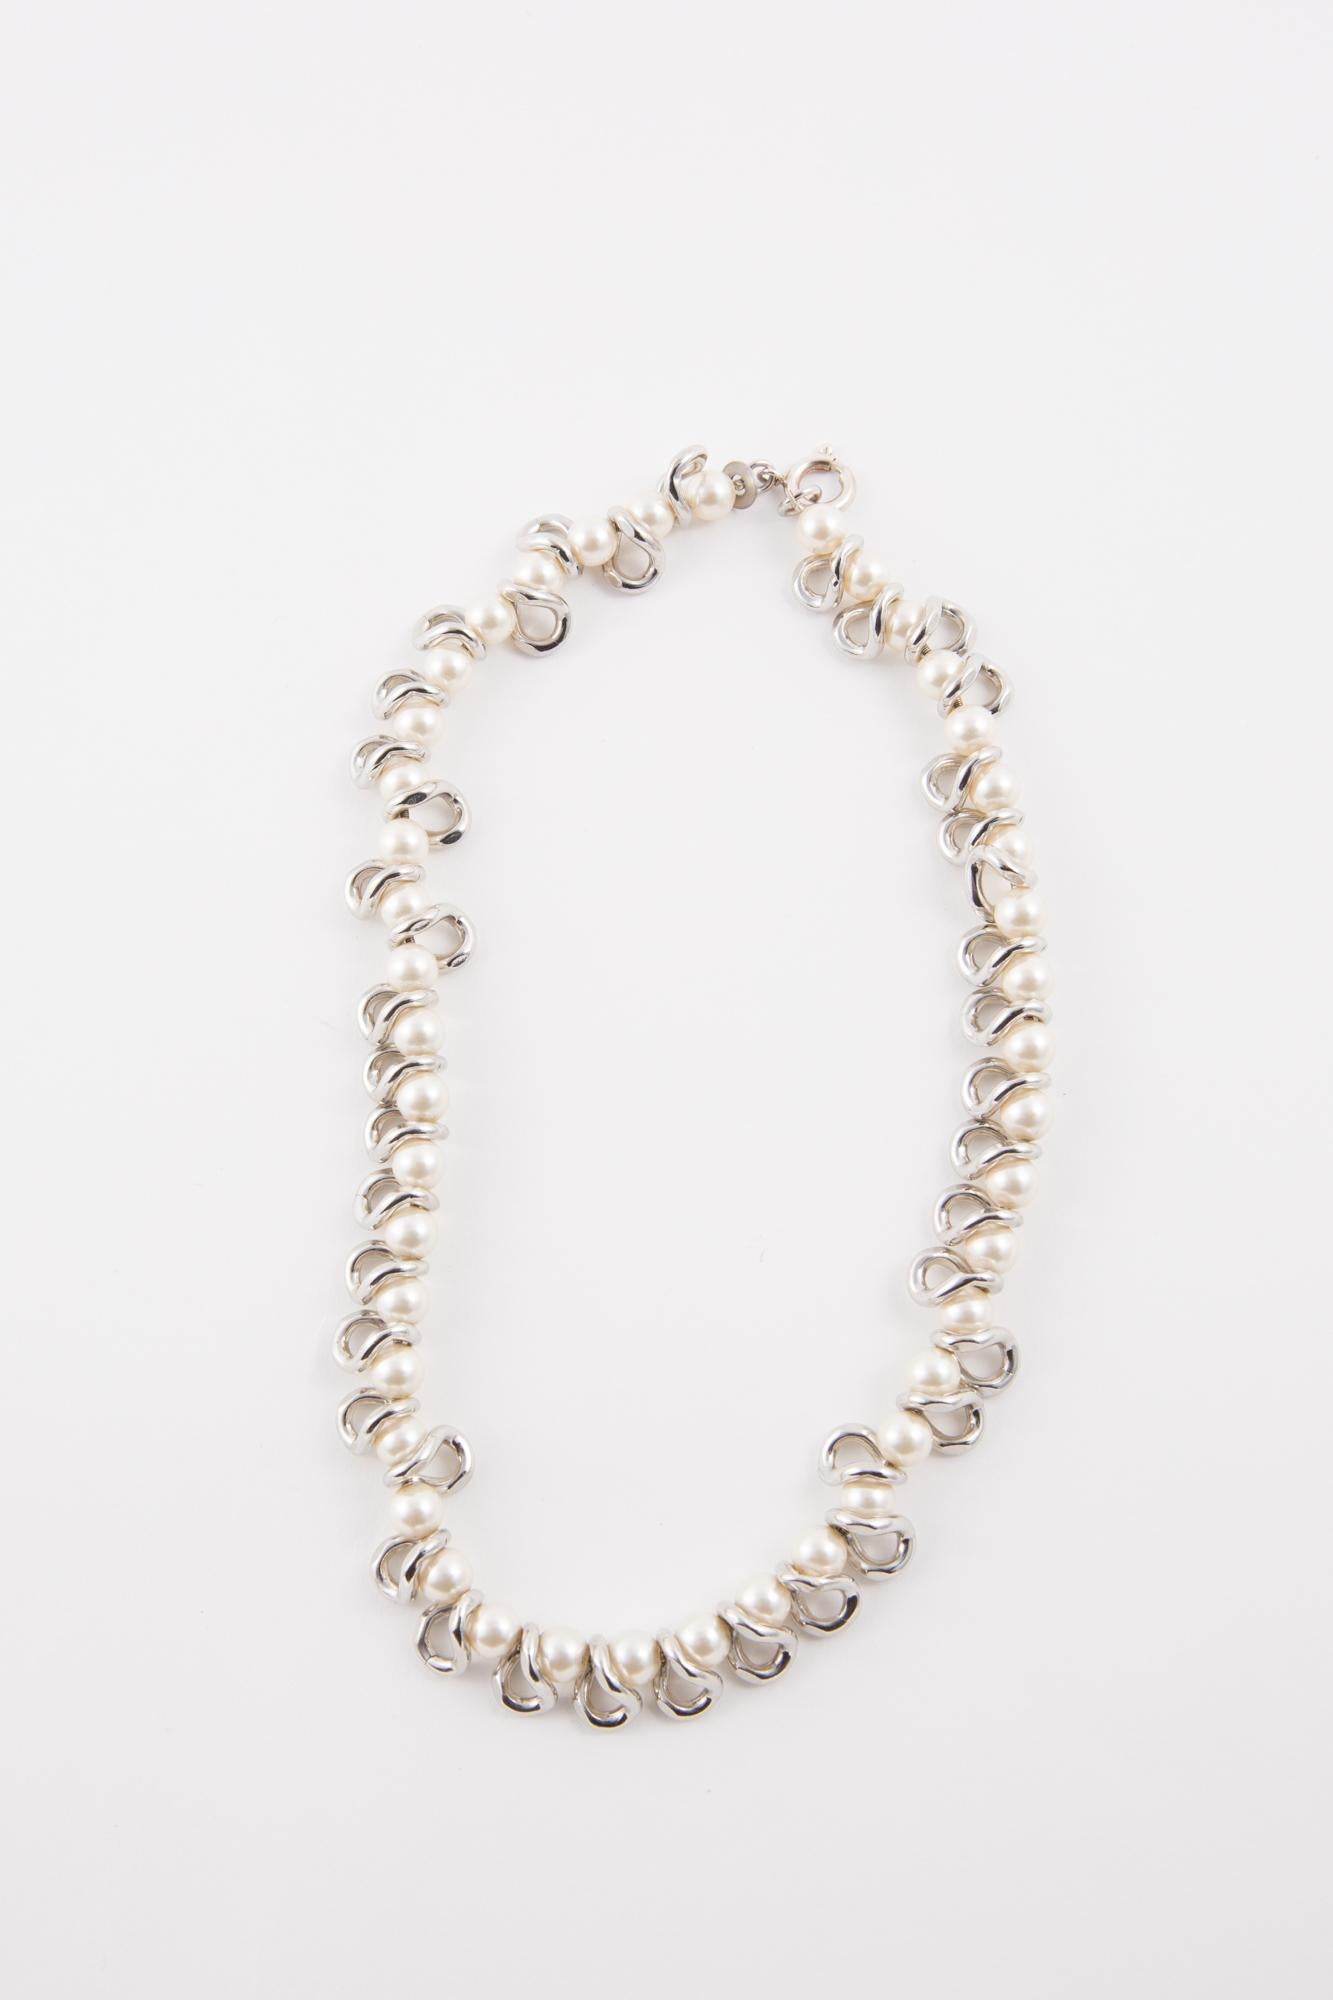 Ligia Dias faux pearls and silver tone chain links necklace featuring silver tone free links, a pitted logo plaque, a claps opening. 
In excellent vintage condition  Made in France. 
Length: 17.3in. (44cm)
Width: 0.60in (1.5cm)
We guarantee you will